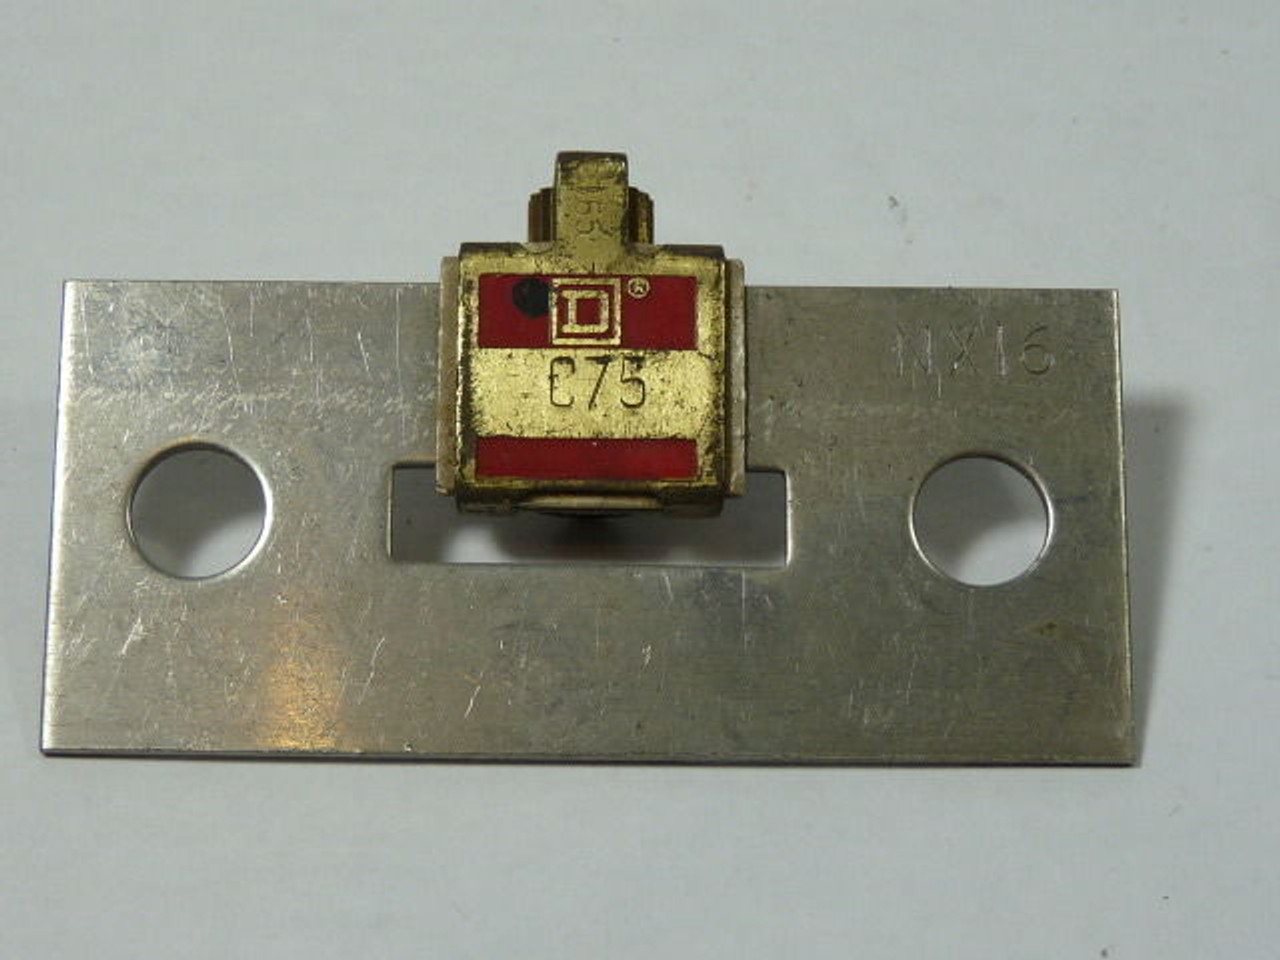 Square D C75 Overload Relay Thermal Heating Element USED